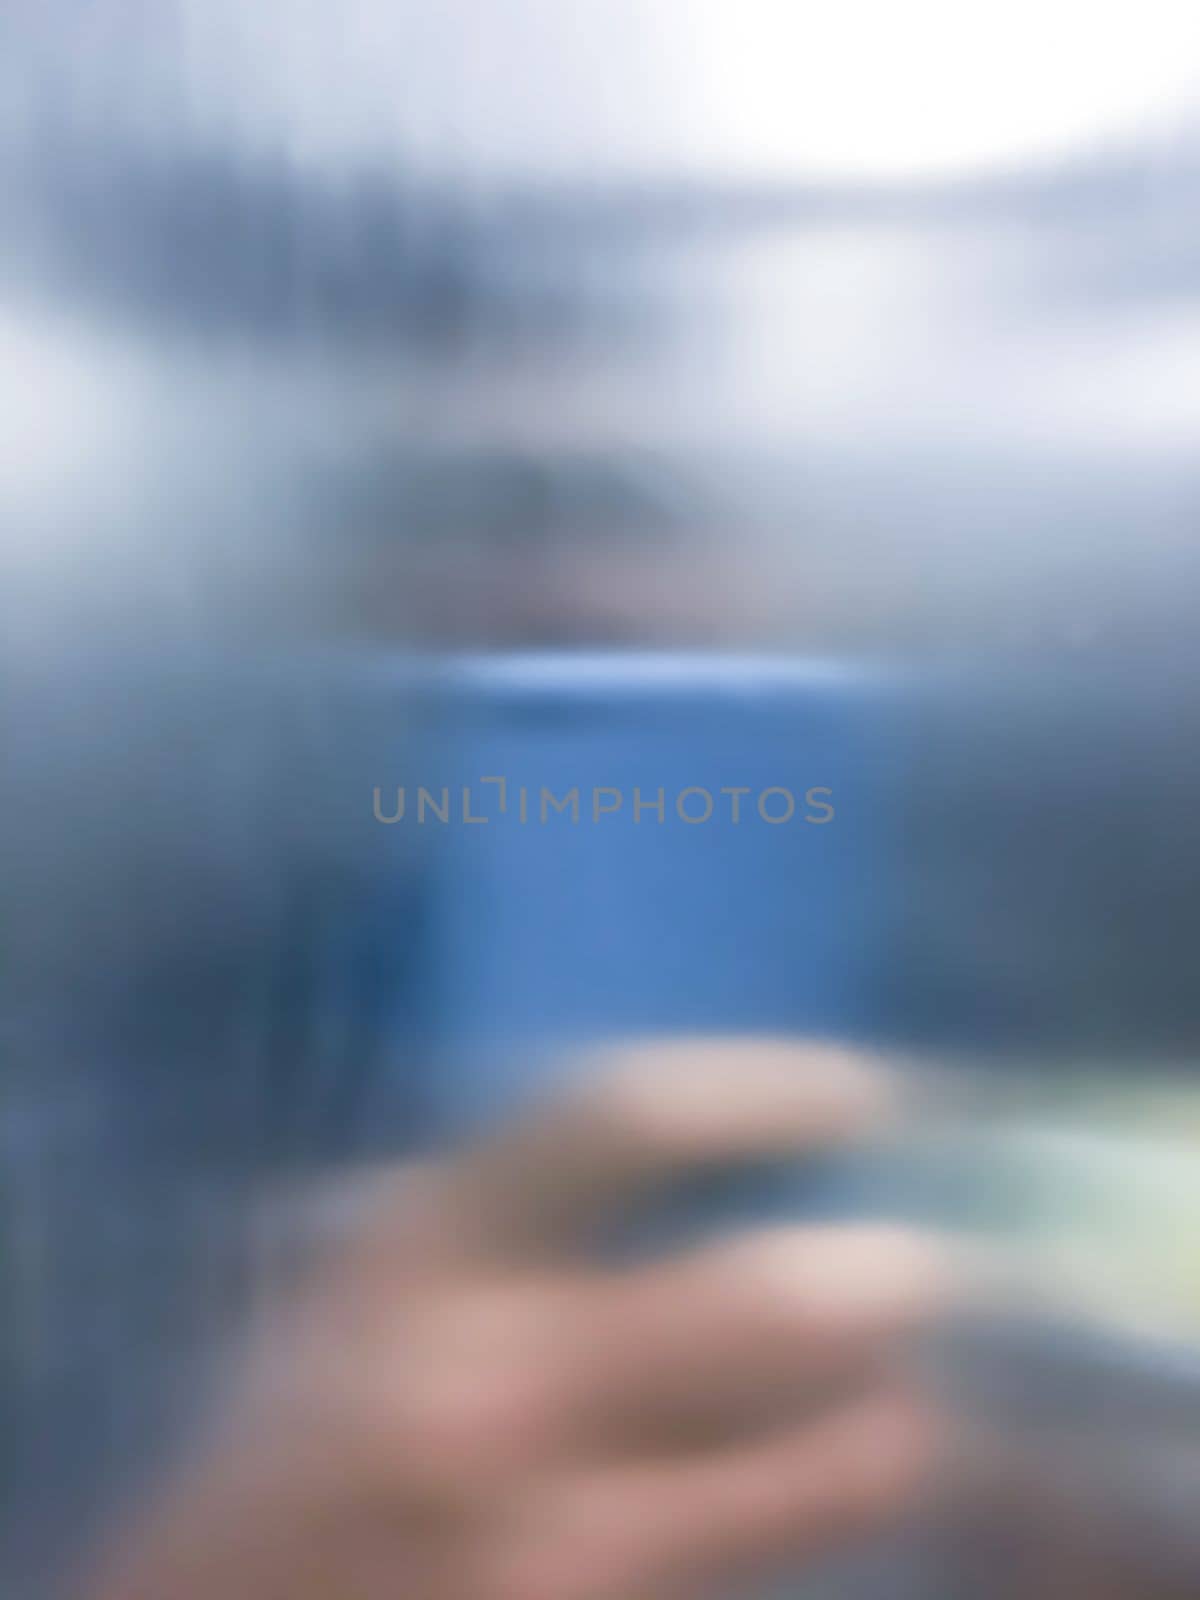 Blurry image of a person taking selfie